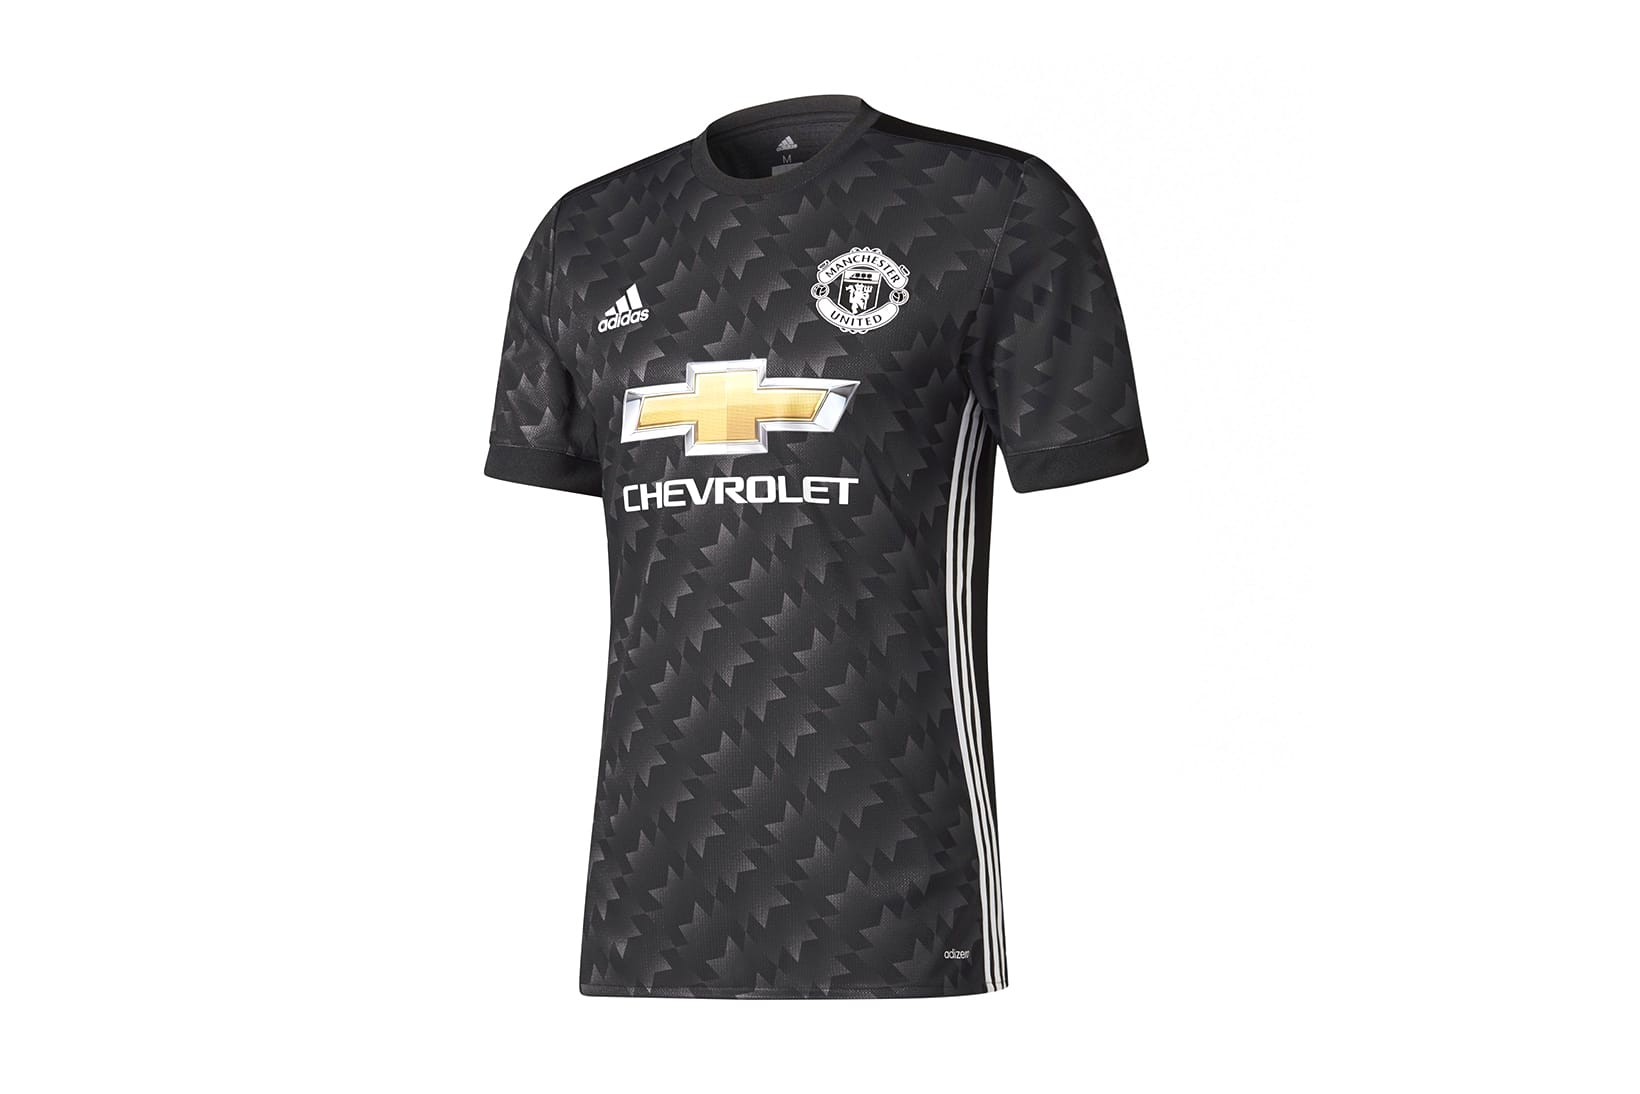 jersey manchester united 2017